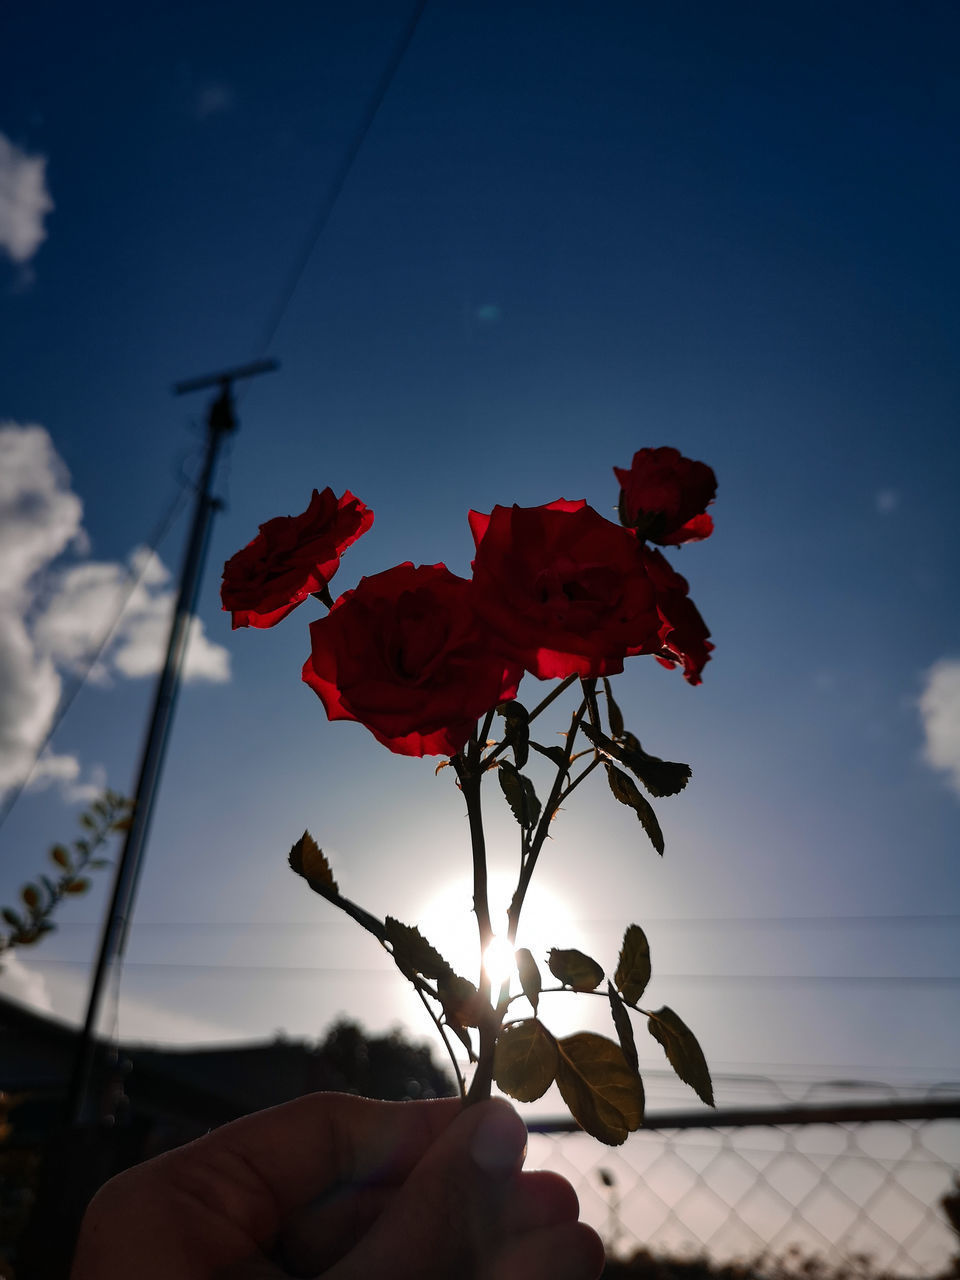 CLOSE-UP OF RED ROSE PLANT AGAINST SKY